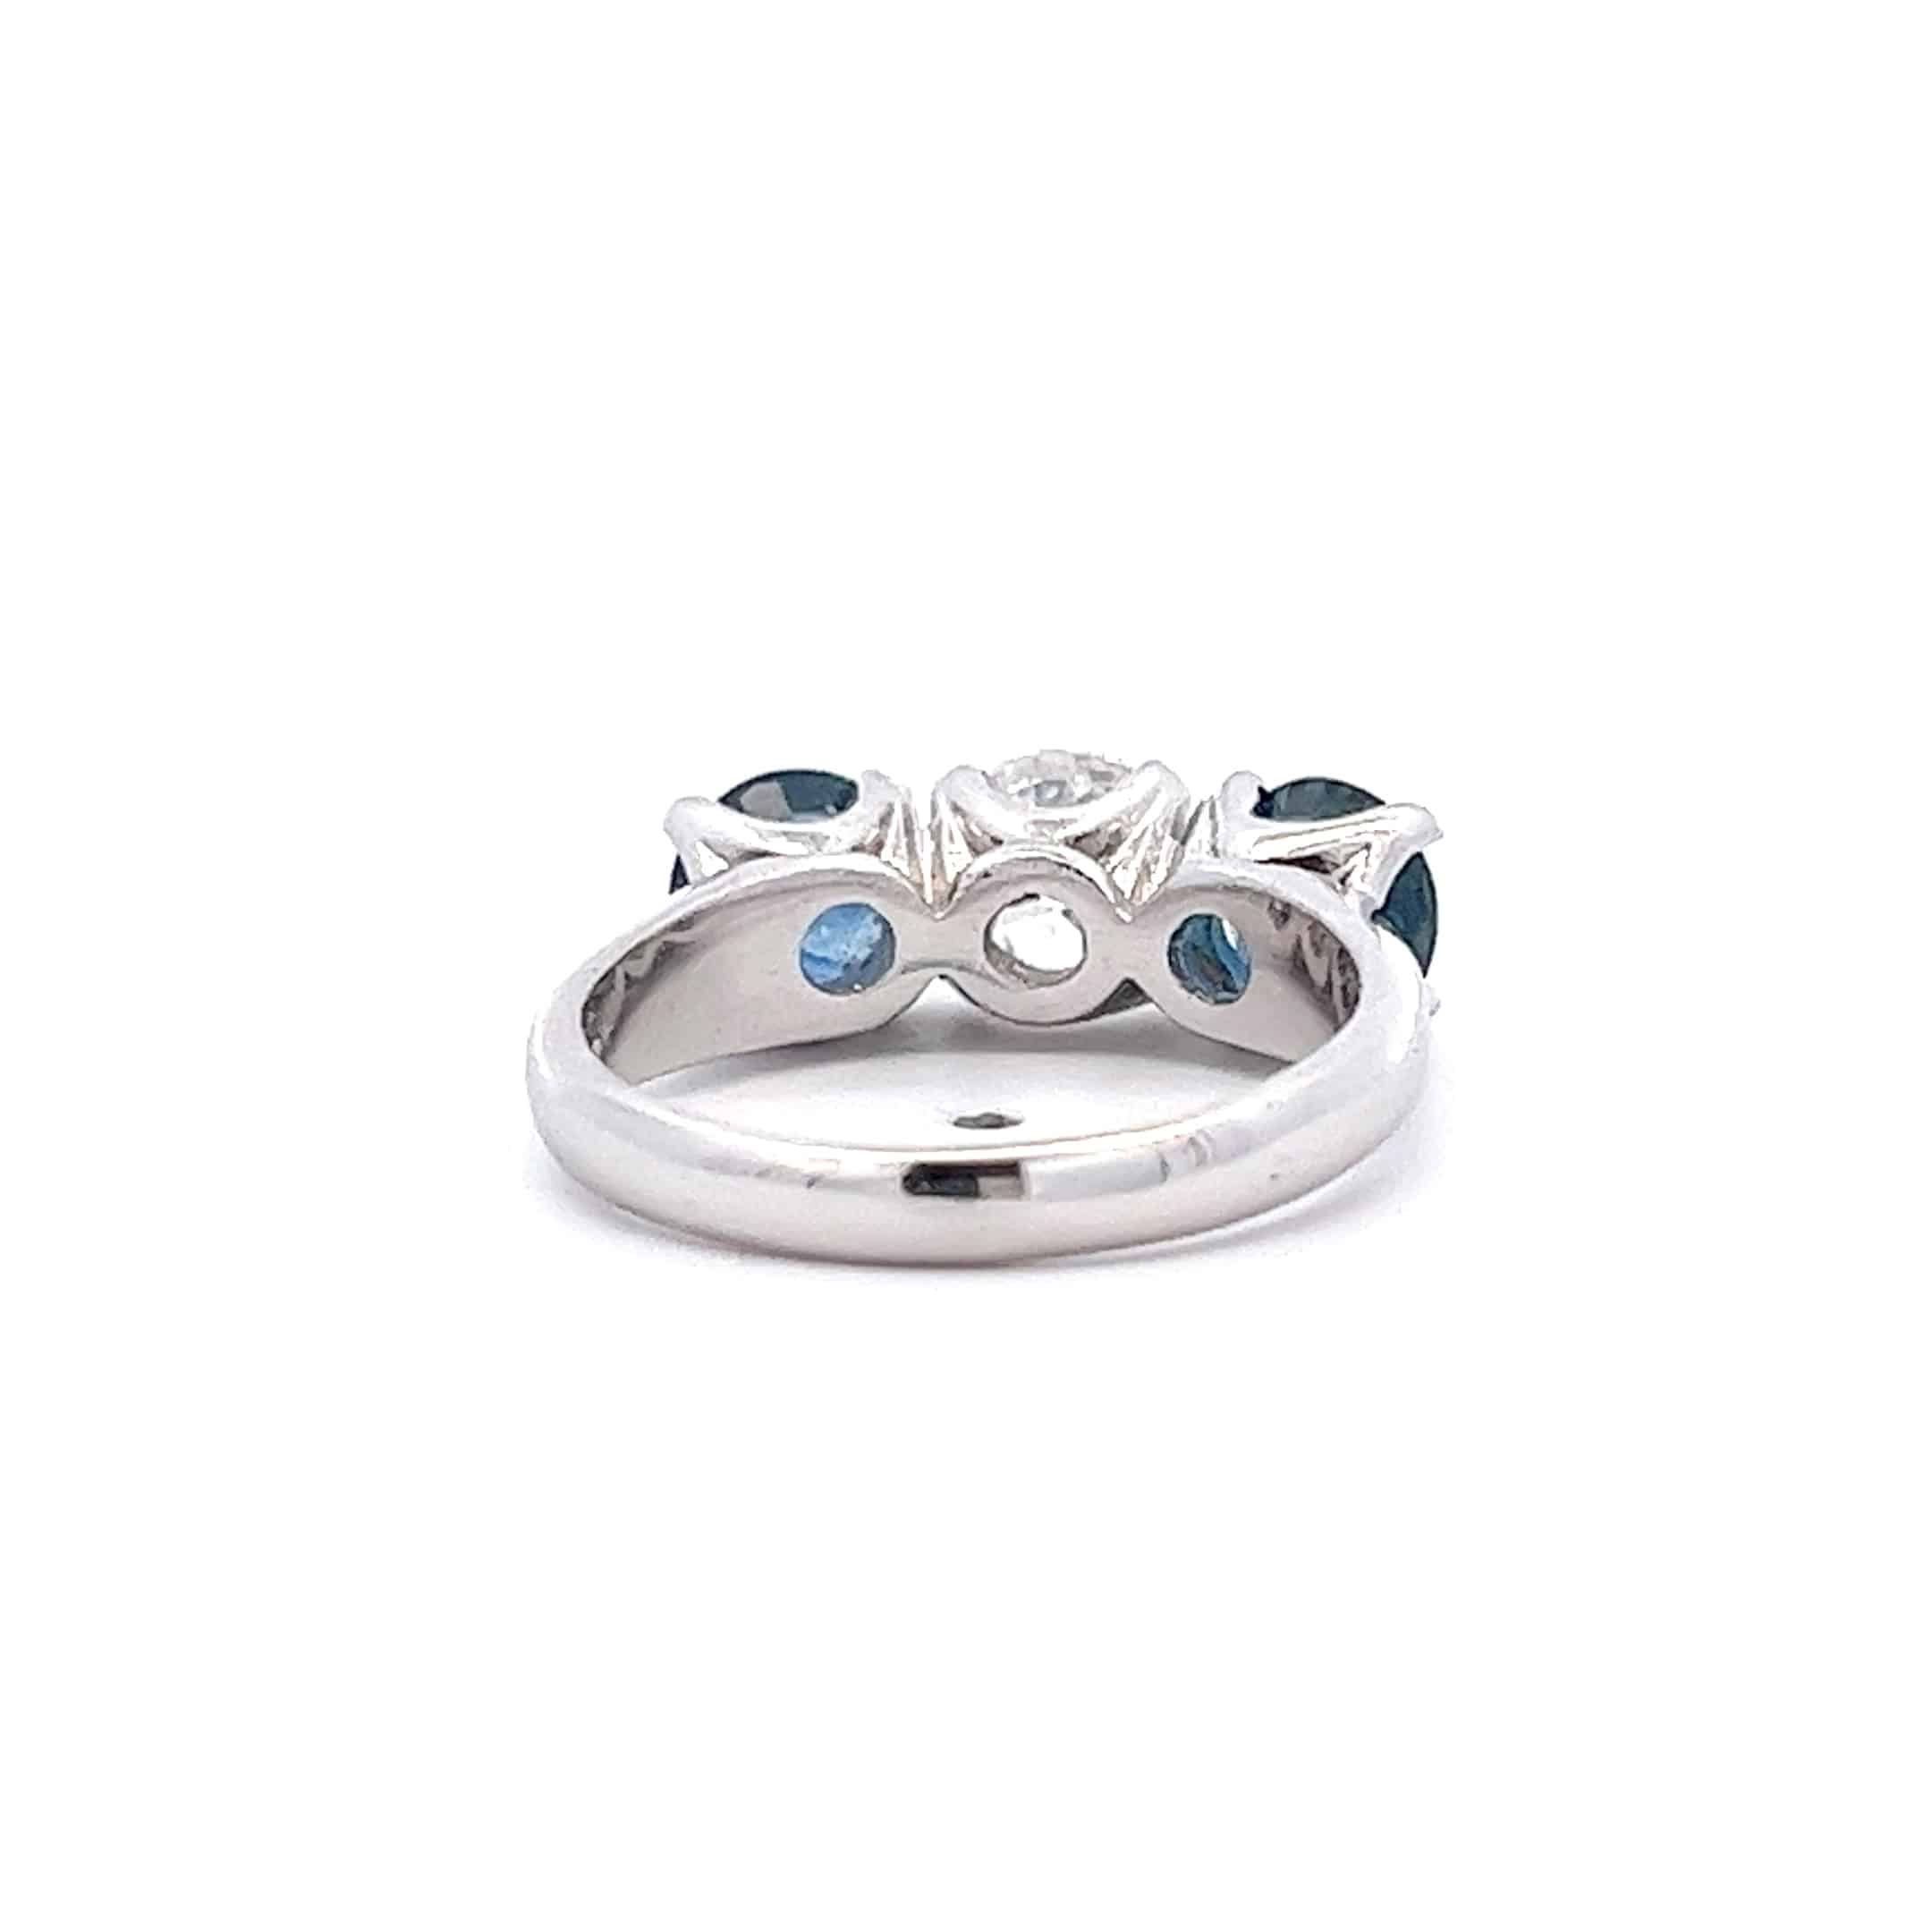 1ct Brilliant Cut Diamond set with Two Sapphire in Four Claw Settings mounted in 18ct White Gold – Pre-Owned